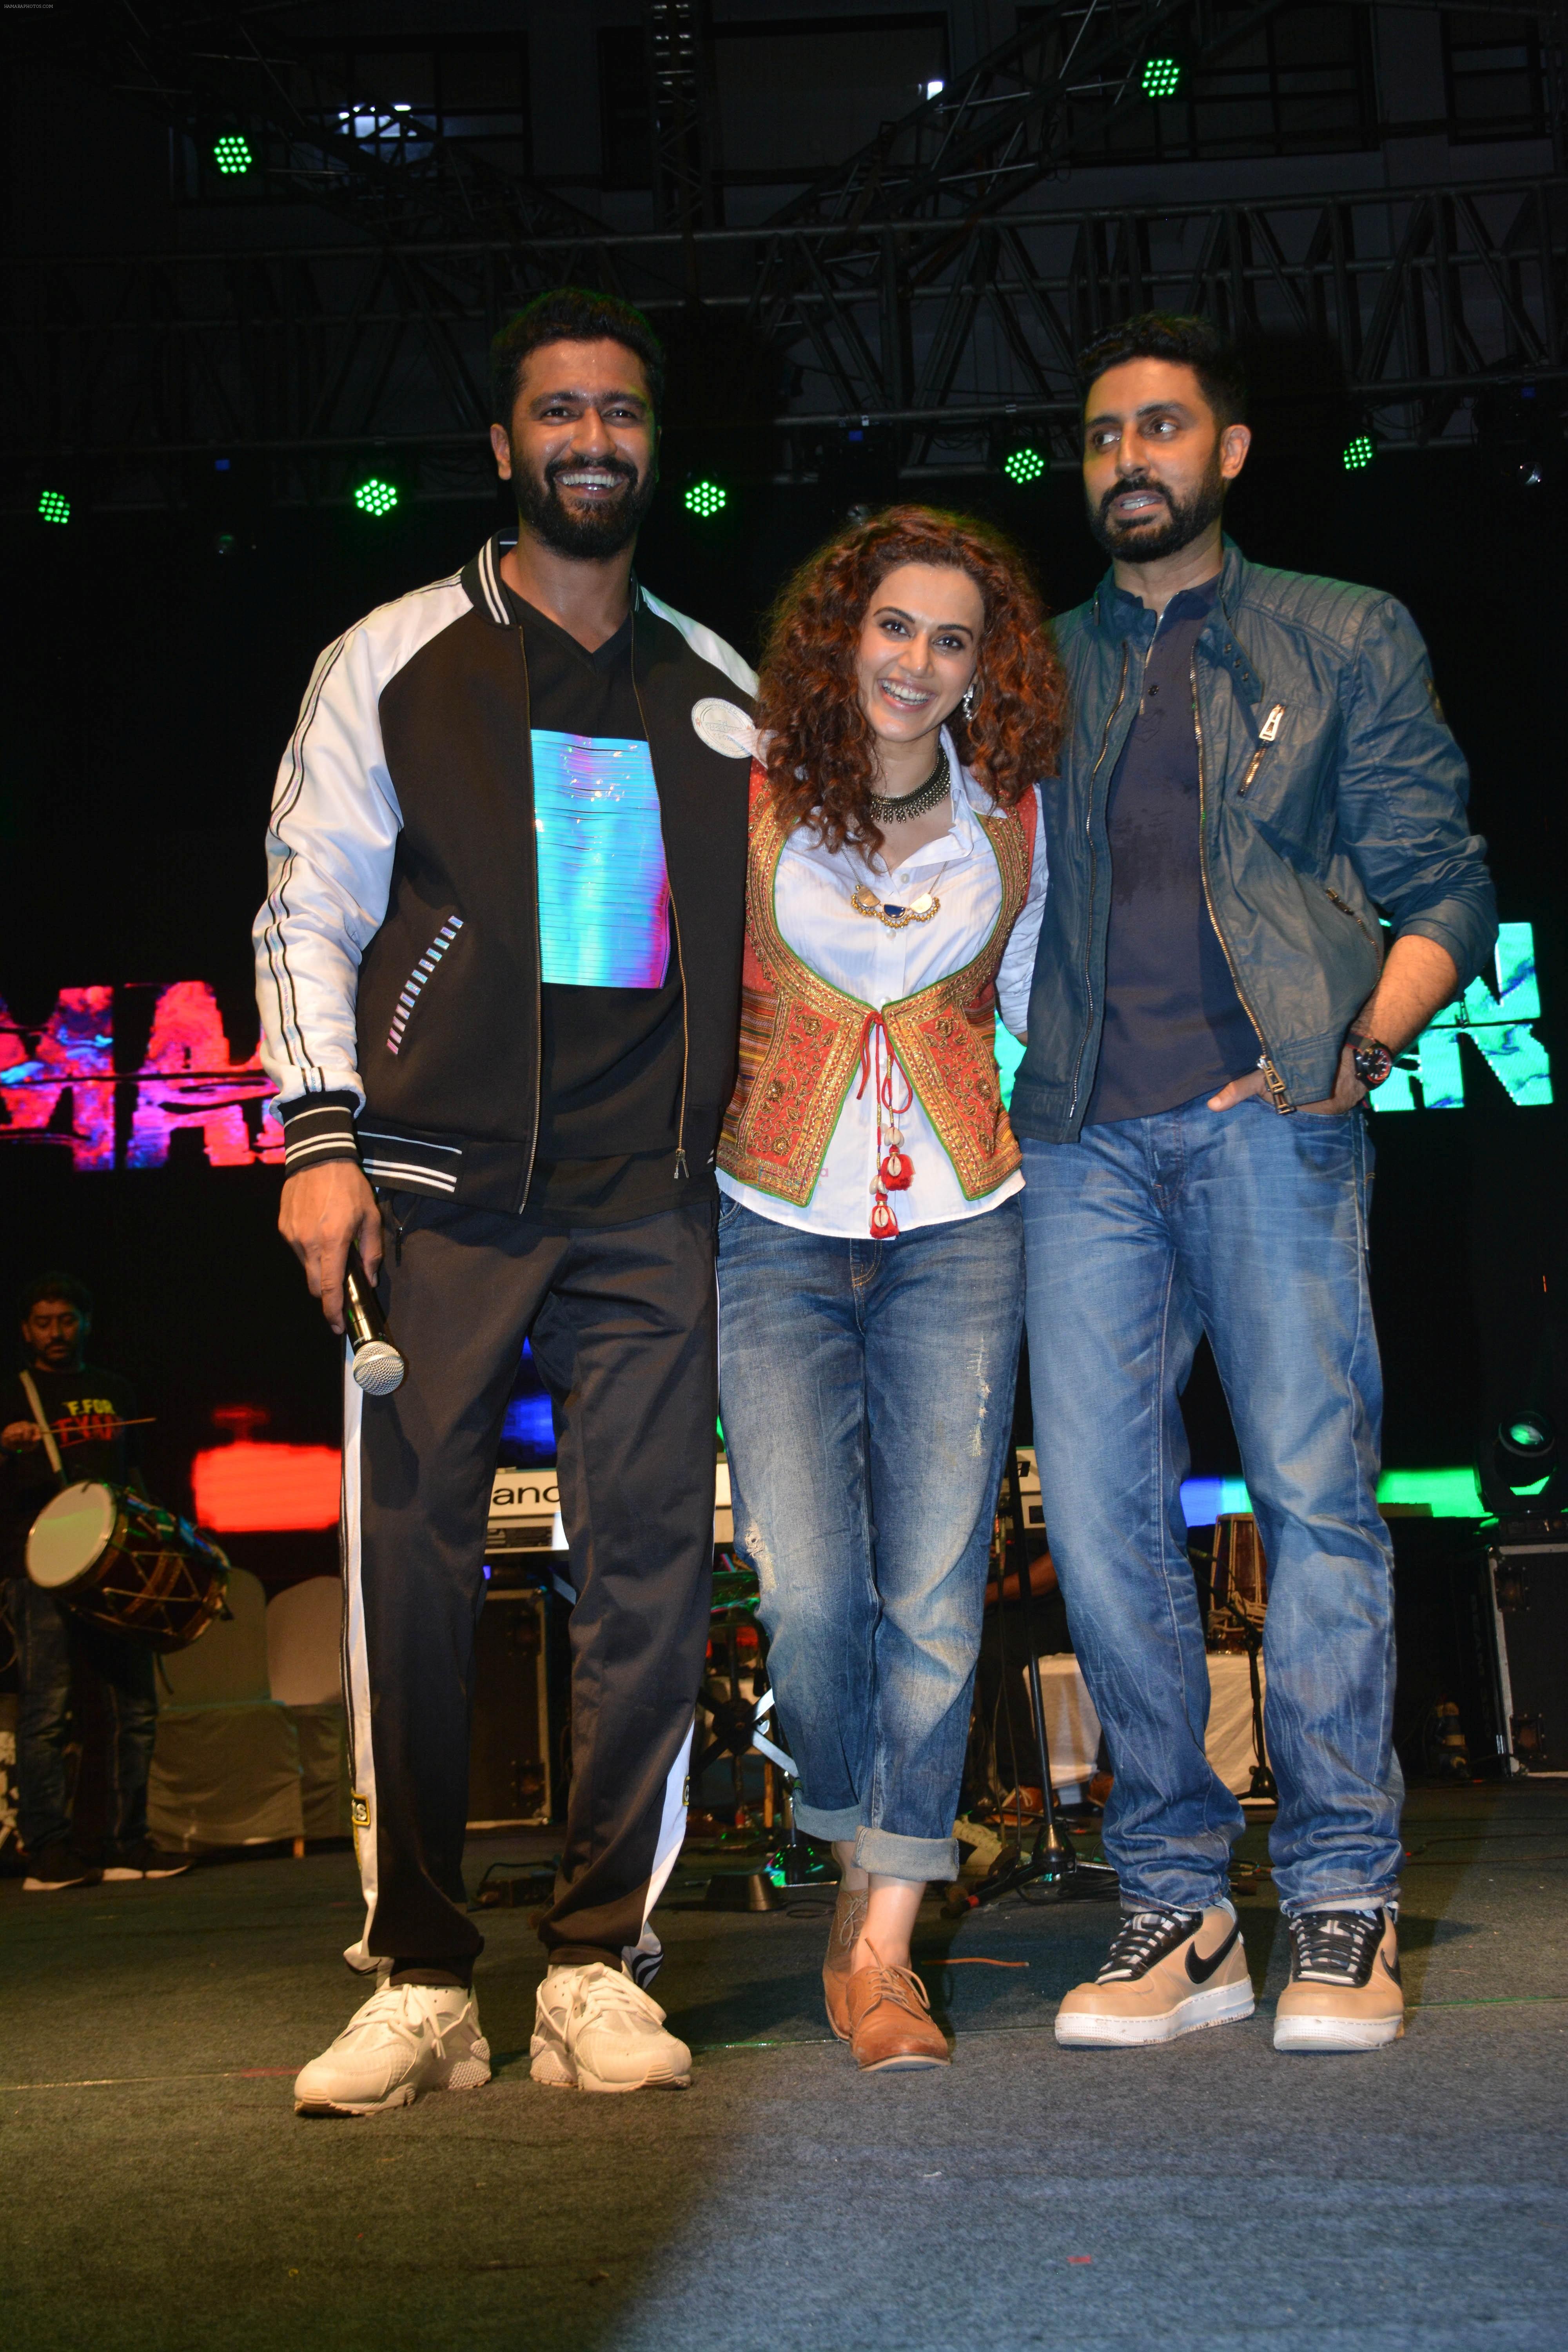 Vicky Kaushal, Taapsee Pannu, Abhishek Bachchan at Manmarziyaan Music Concert in NM College In Juhu on 19th Aug 2018